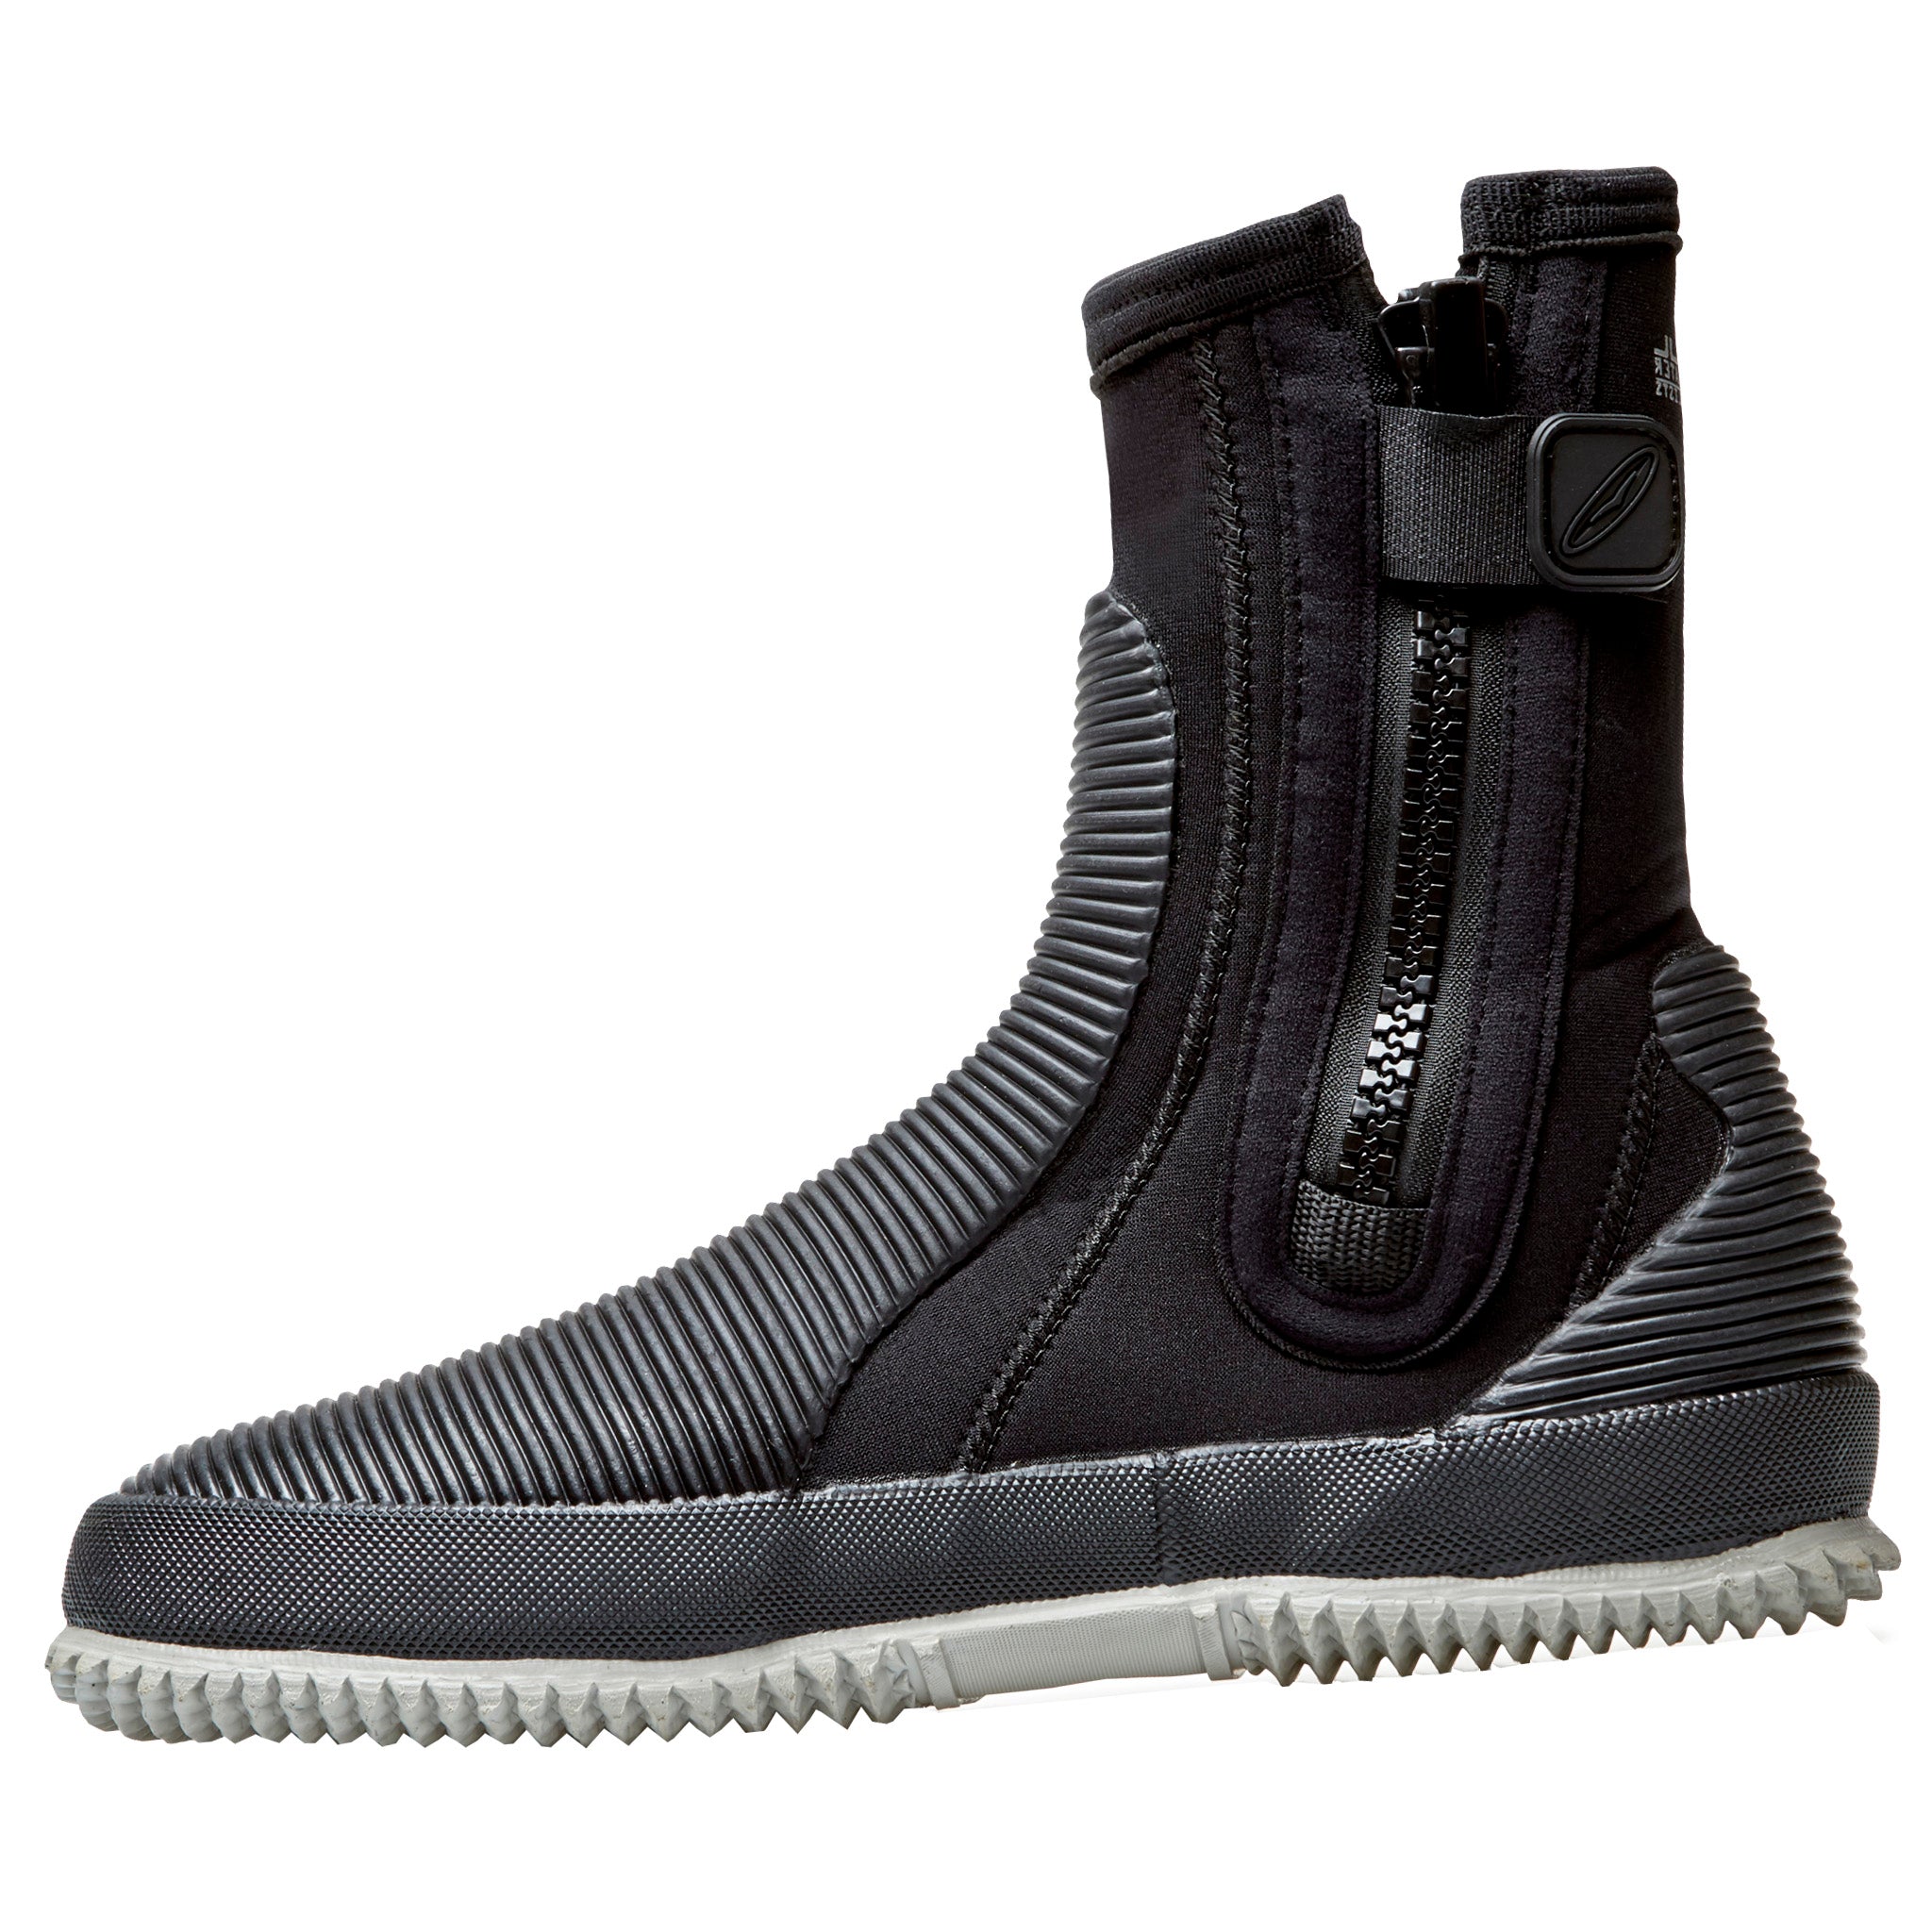 Gul All Purpose 5mm Zipped Dinghy Wetsuit Boots - YKK Side Zip